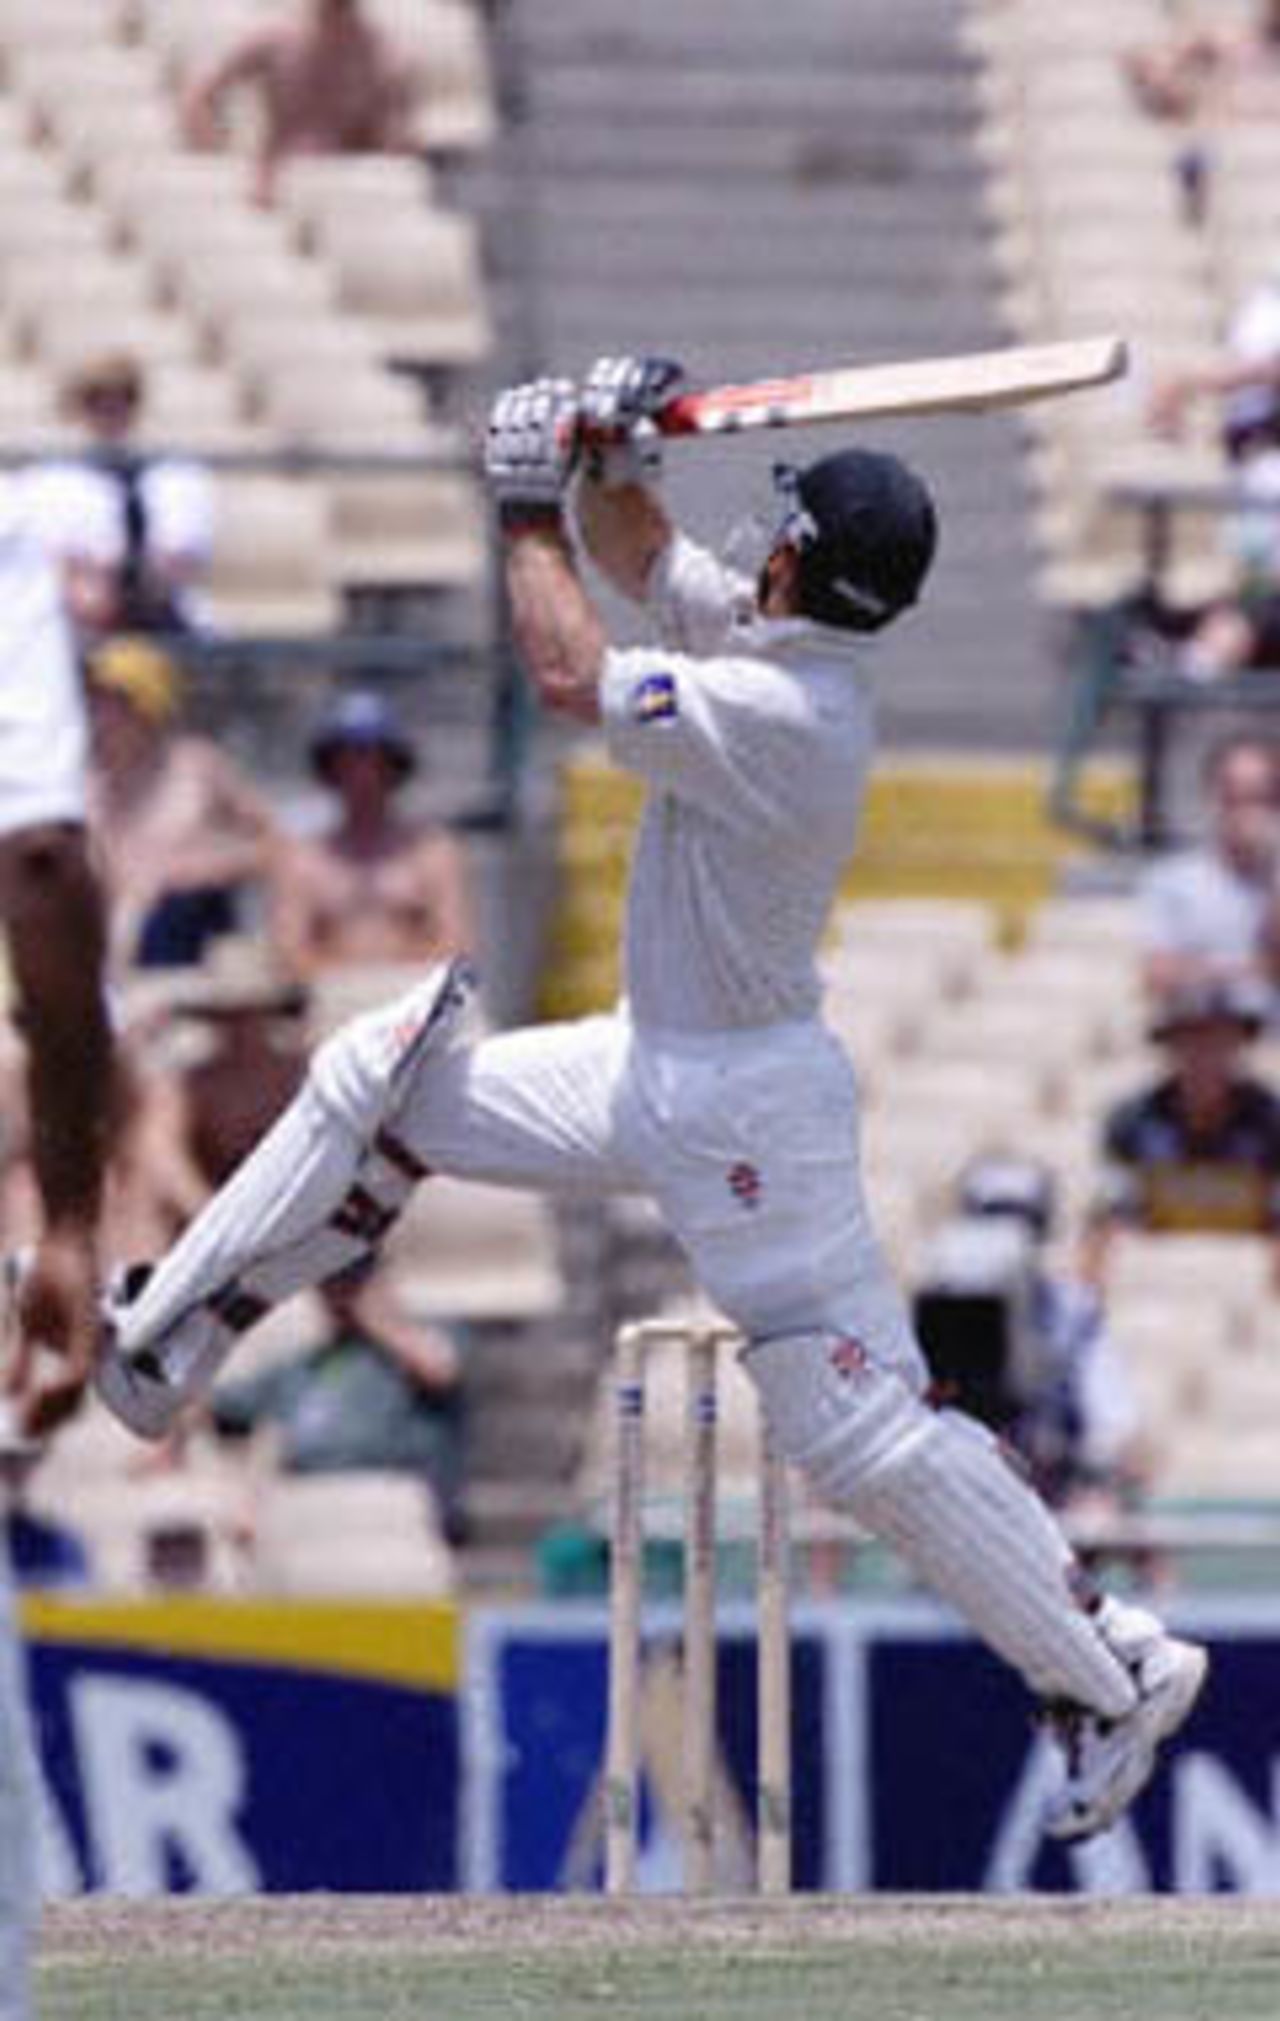 Australian batsman Michael Slater takes an unusual swipe at the ball in the fifth Test at the Sydney Cricket Ground, 06 January 2001. Slater smashed 86 to steer Australia to a six-wicket victory over the West Indies in the fifth Test to clinch a 5-0 series clean sweep and their 15th consecutive Test win.